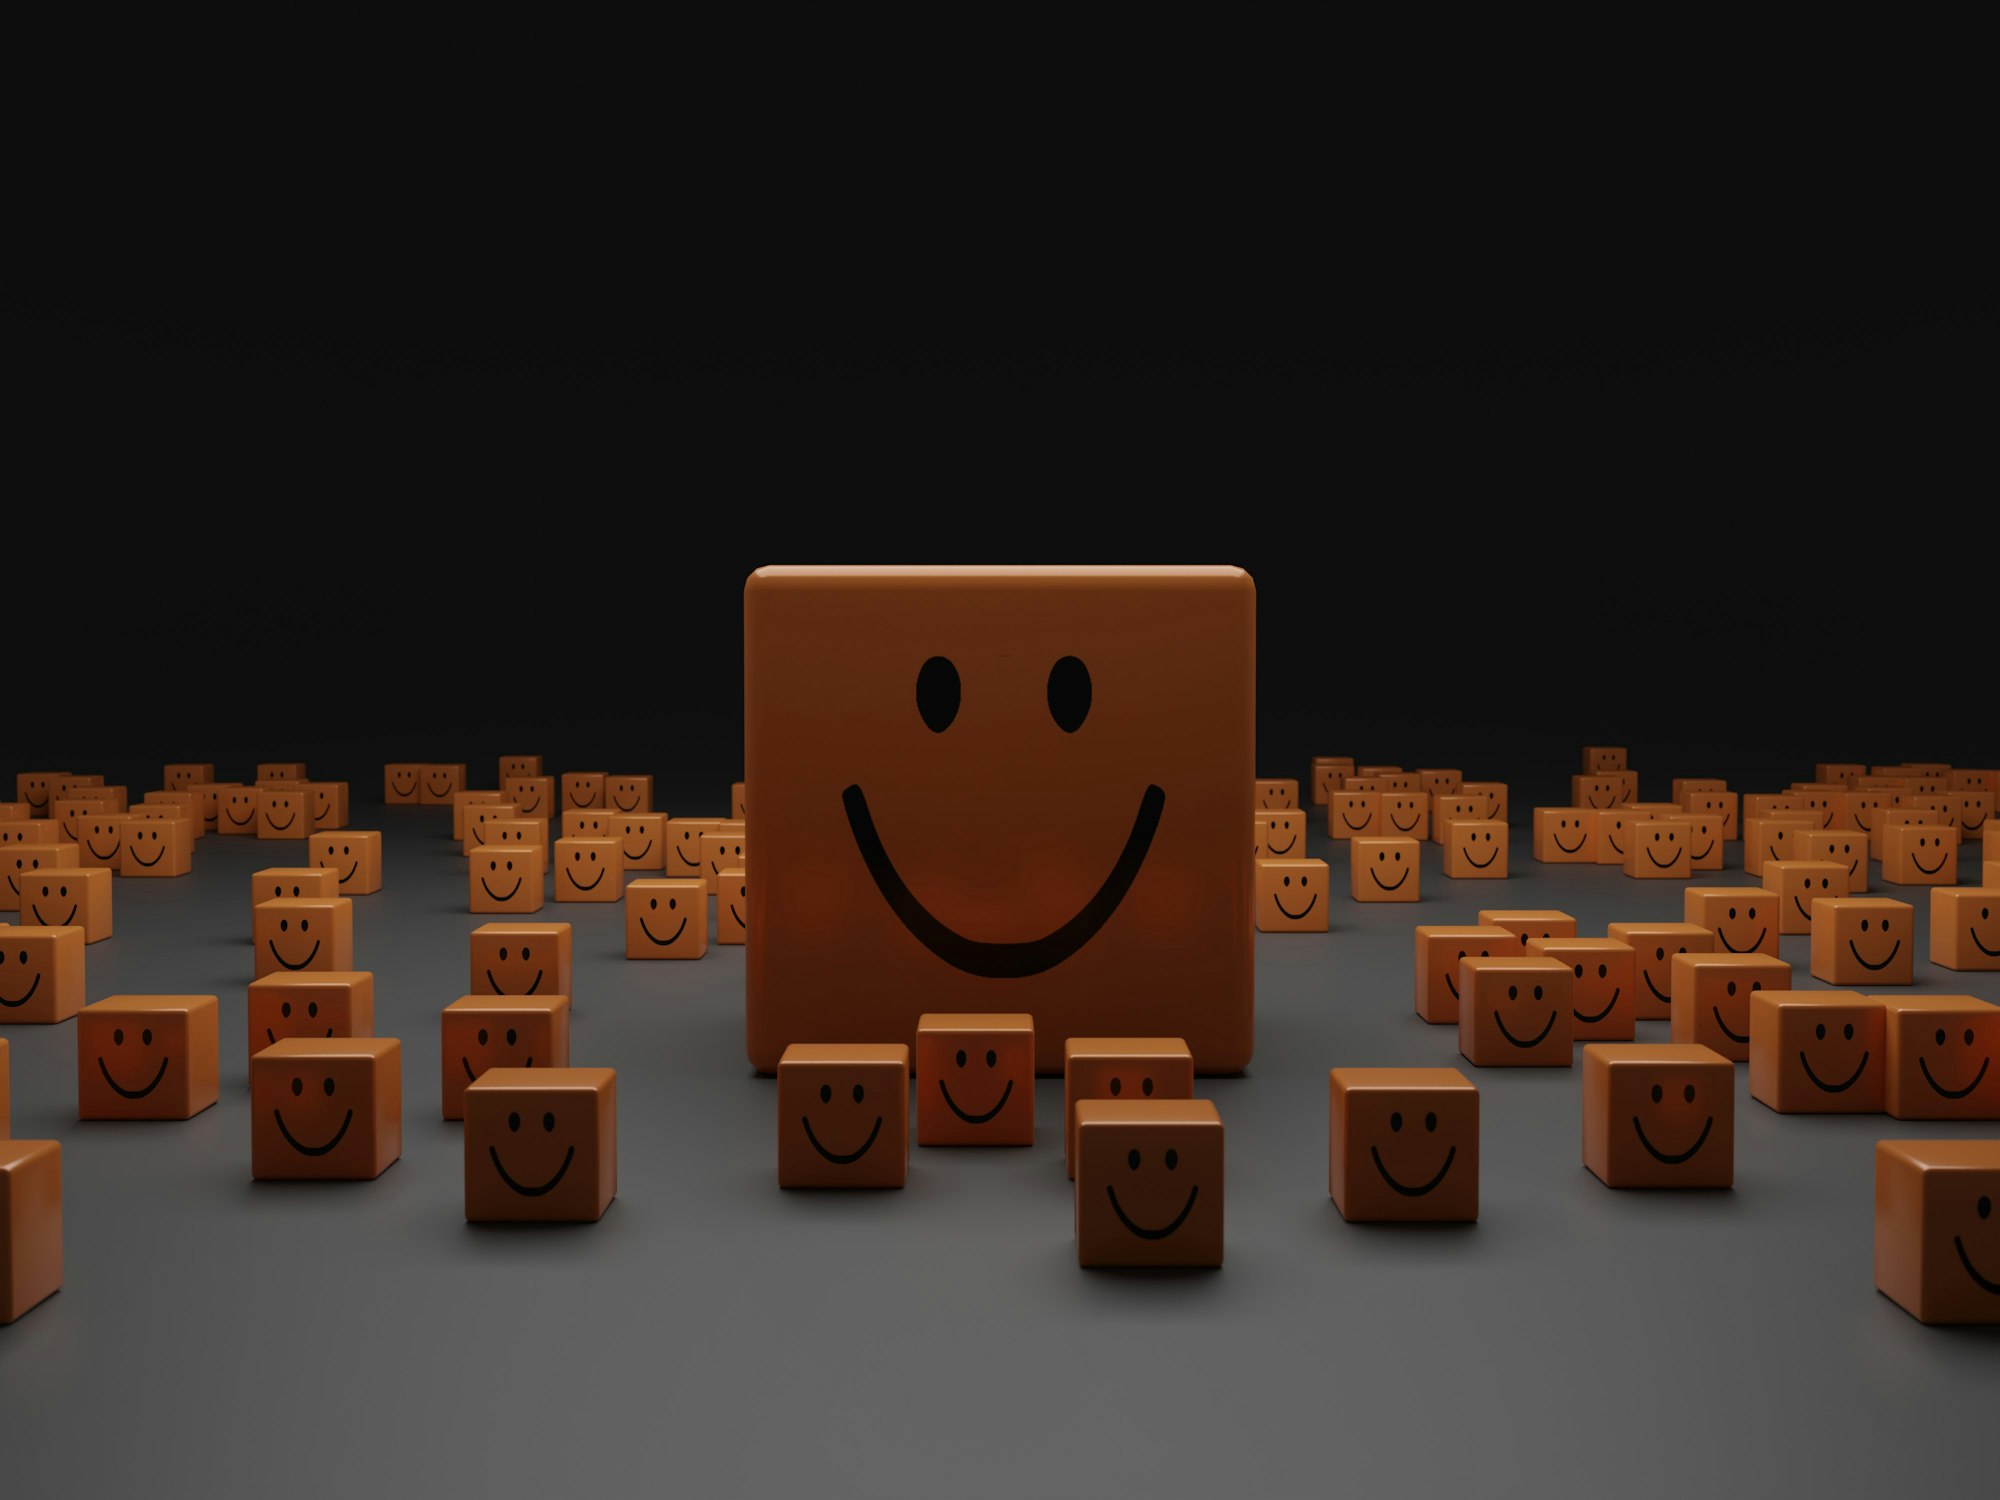 lots of happy cubes sitting on a plane surface.